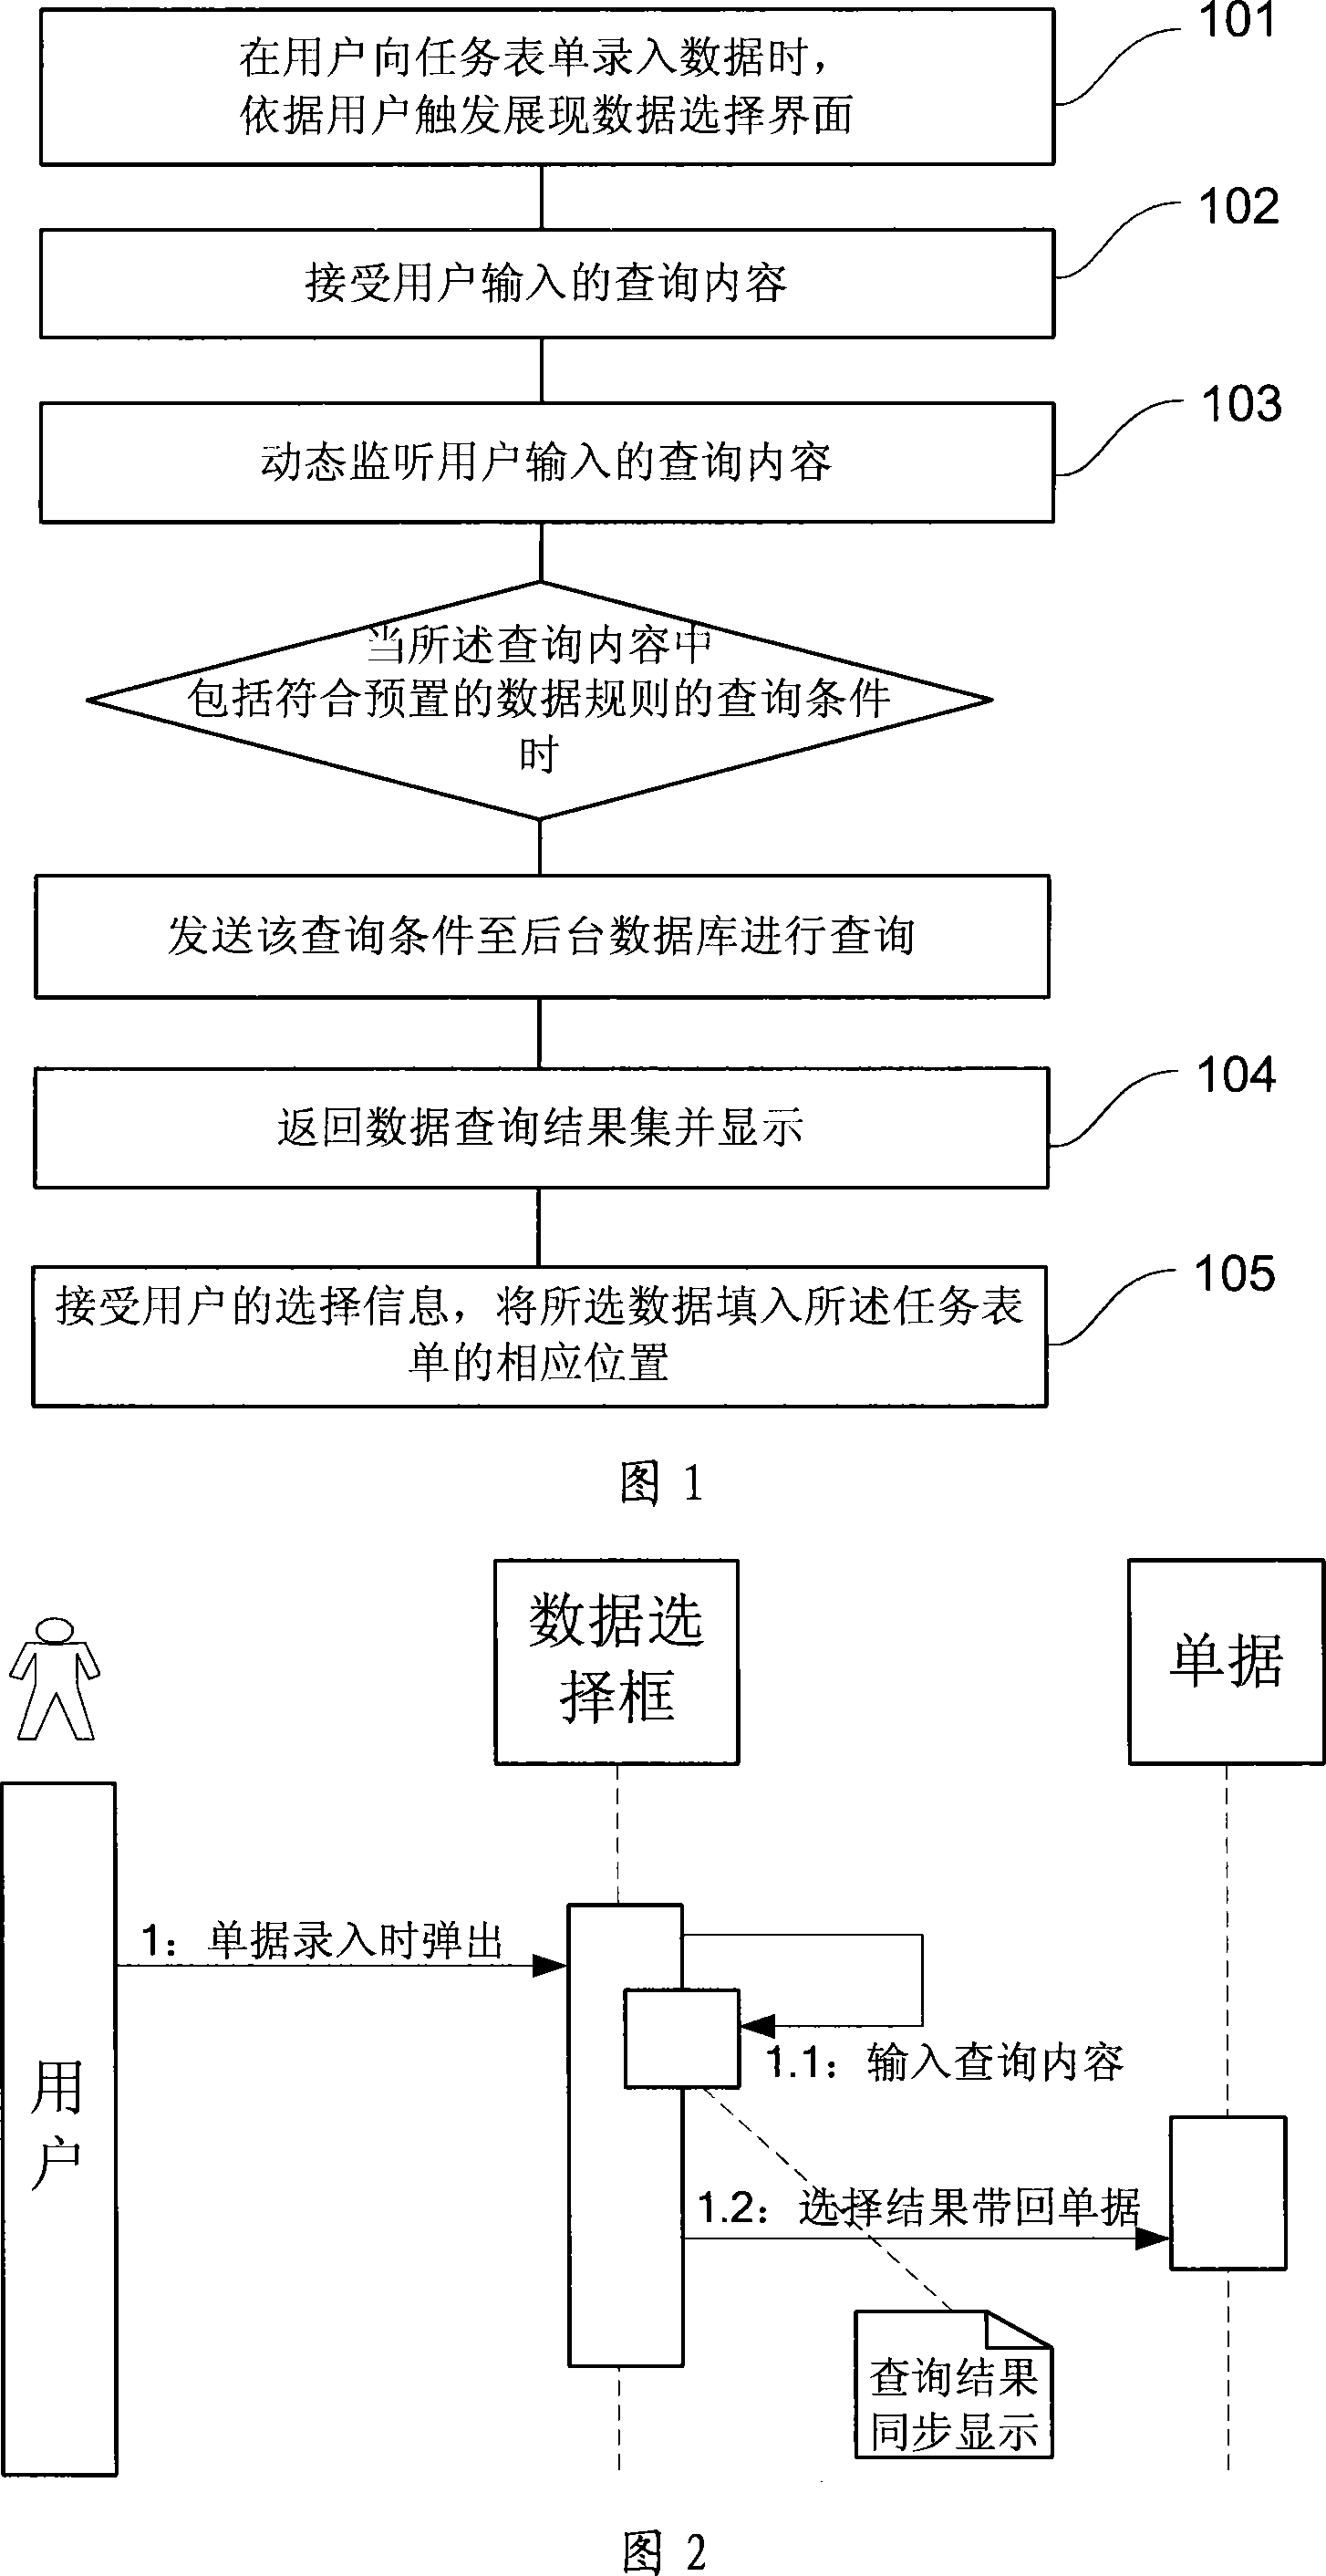 Method and system for implementing dynamic fuzzy inquiry at data selection interface